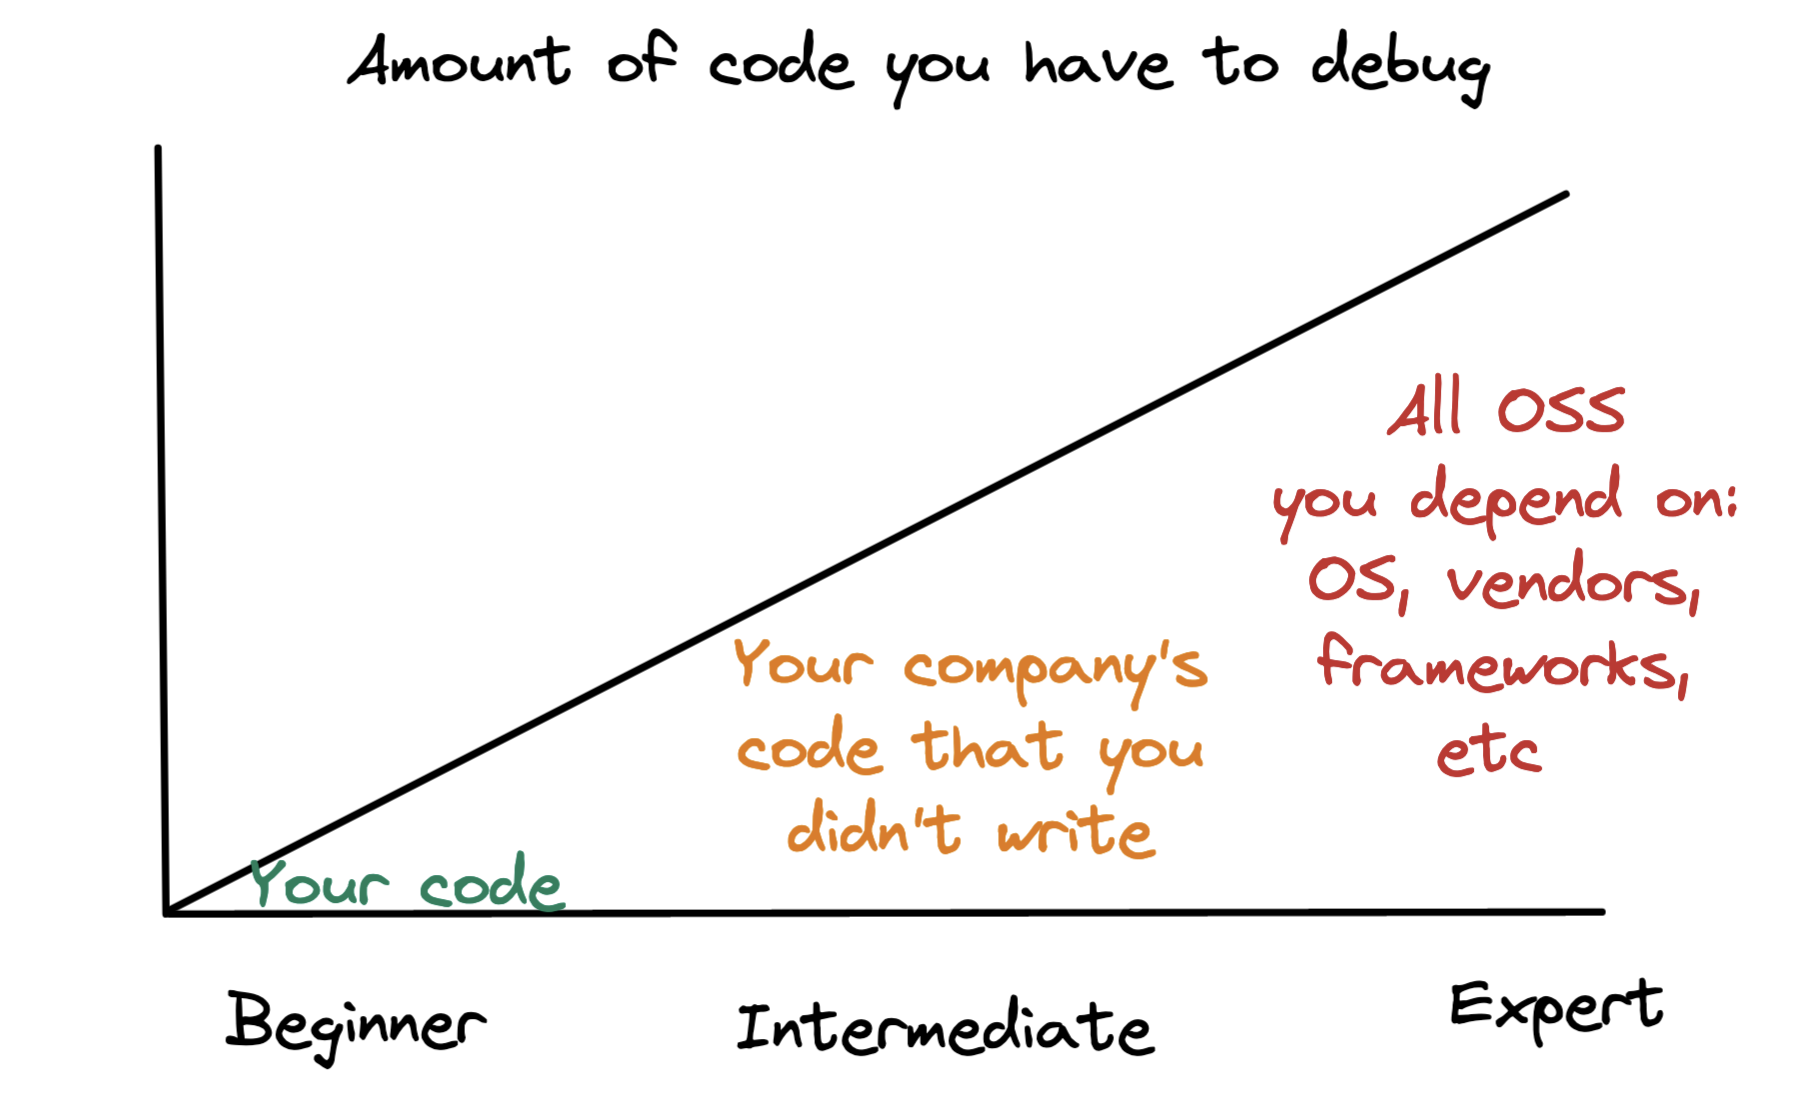 A graph of the amount of code you have to debug, increasing with expertise.